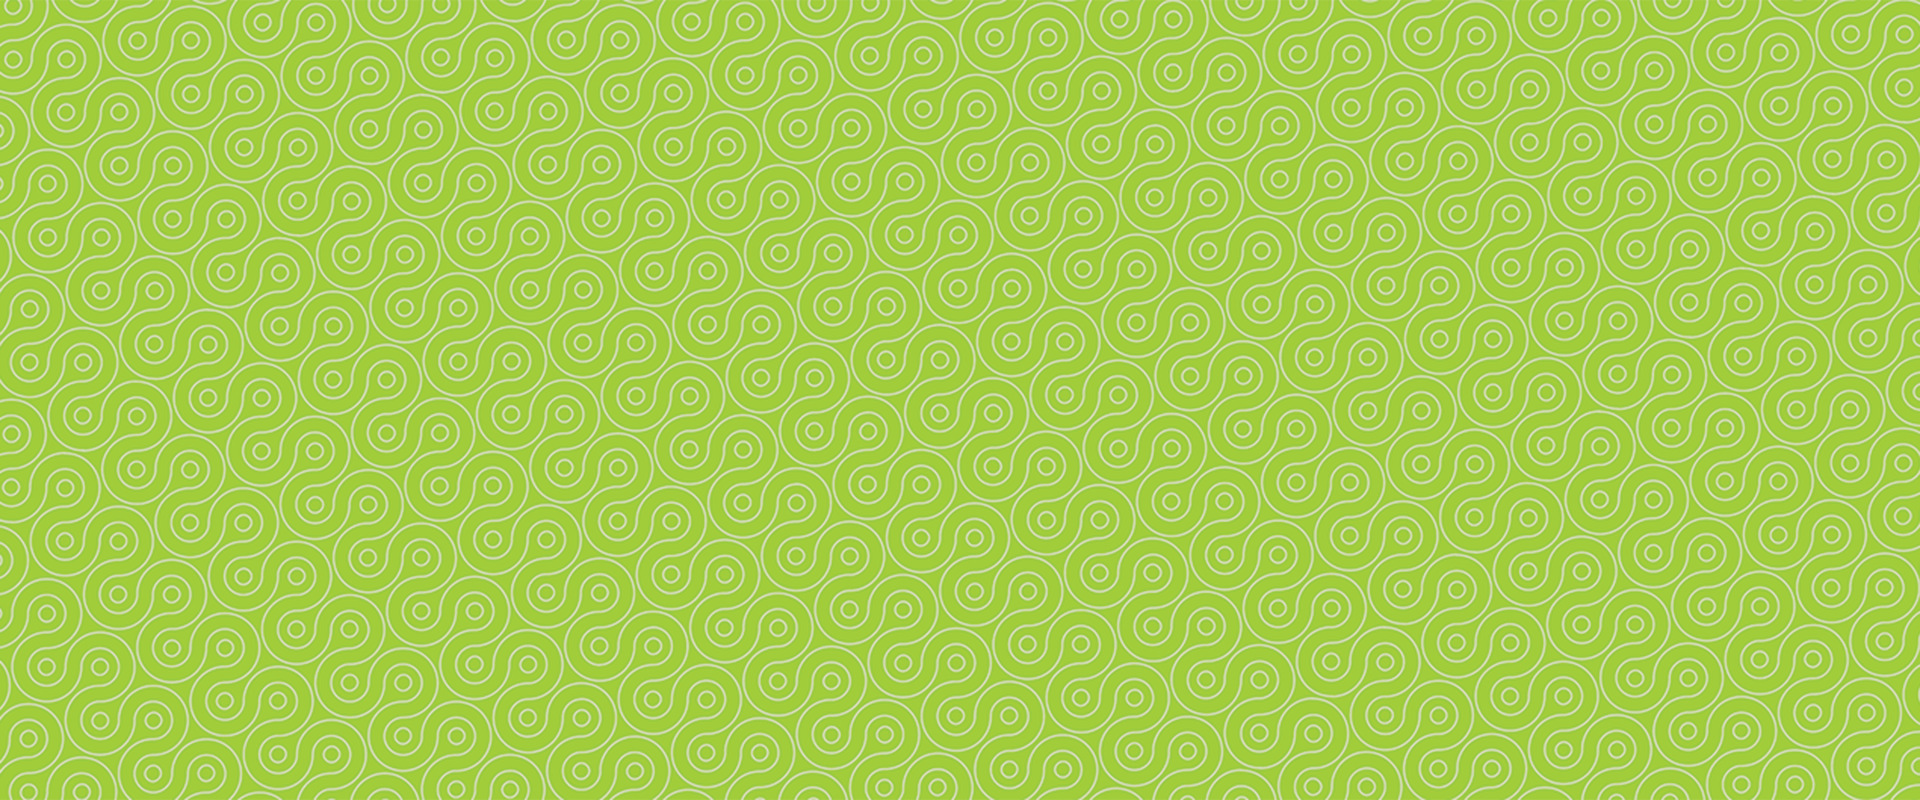 Lime green swirl patterned background image